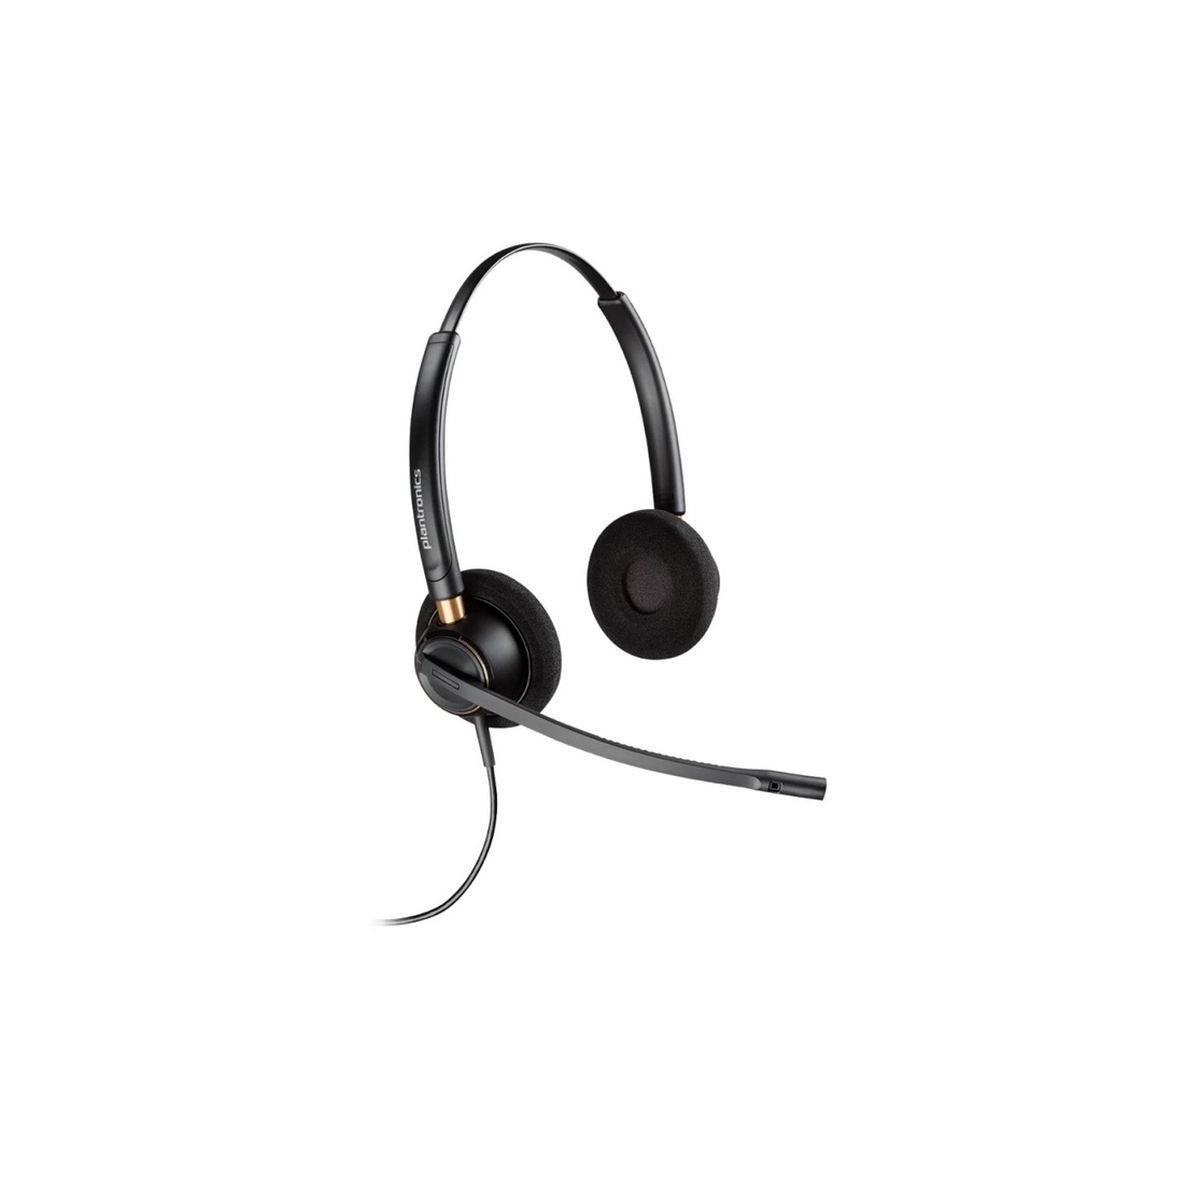 Poly EncorePro HW520 - Wired - Office-Call center - 100 - 6800 Hz - 74 g - Headset - Black